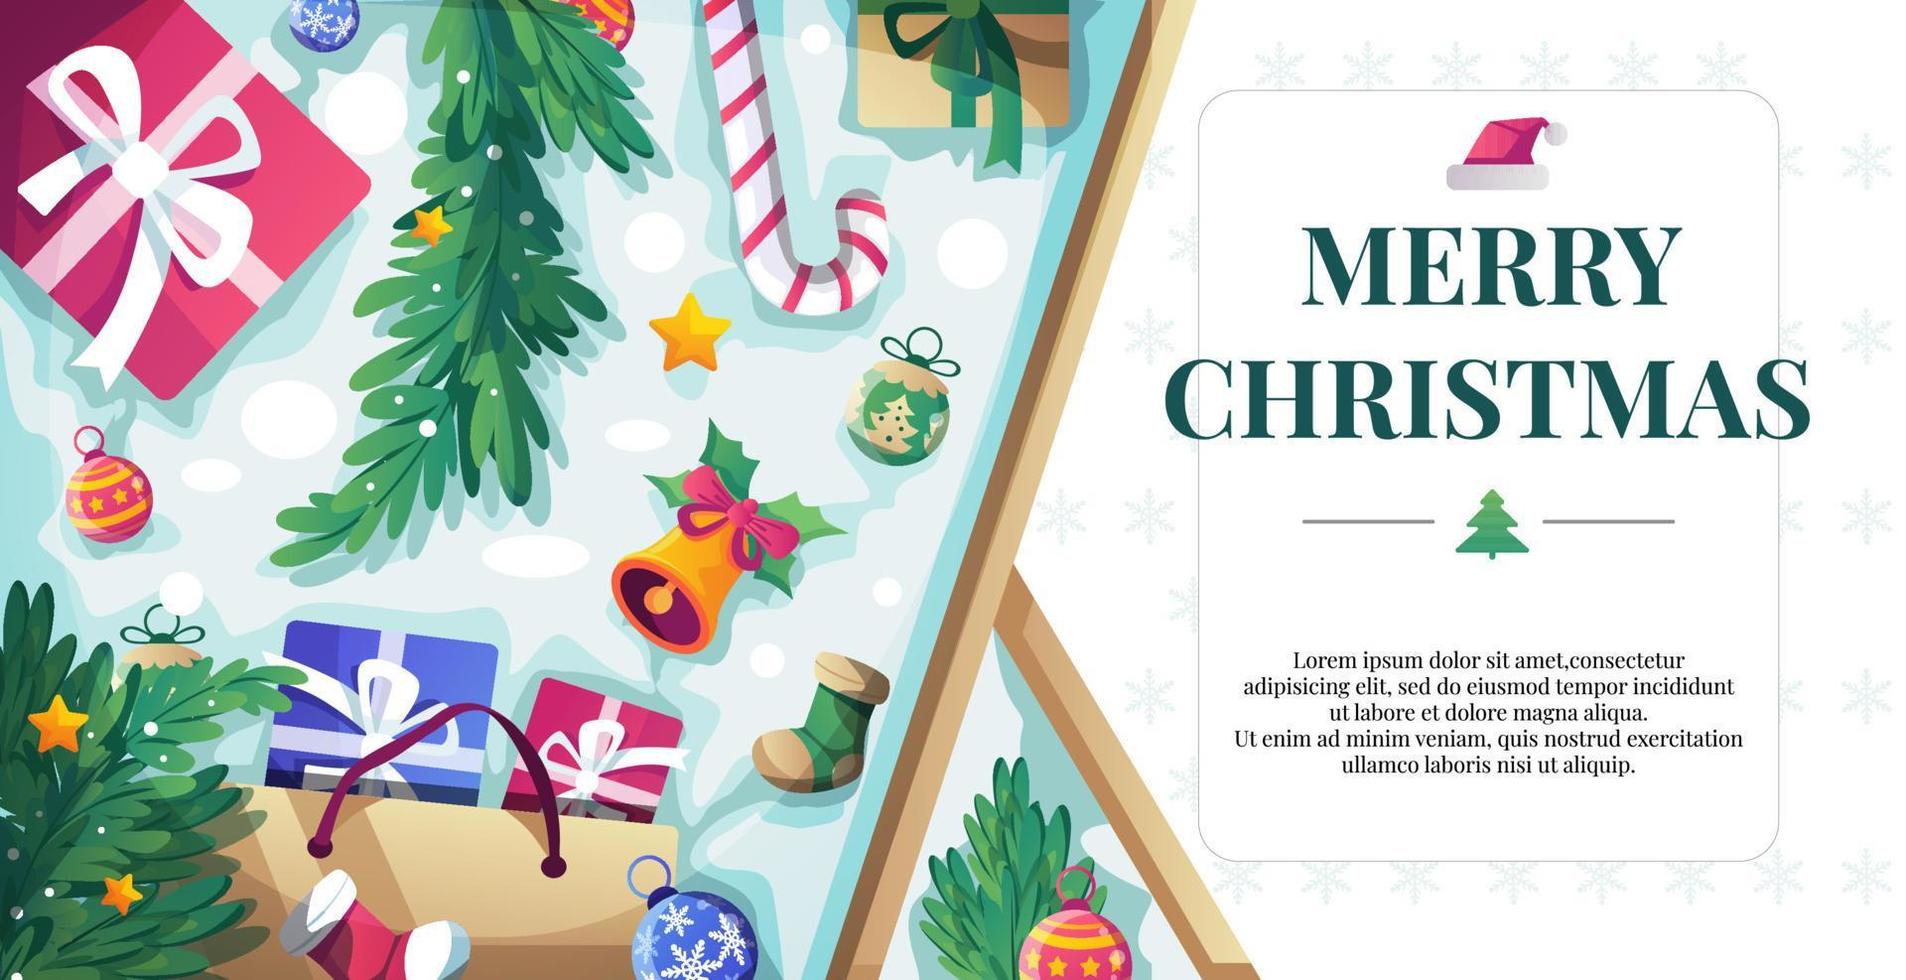 Merry Christmas and New Year background with gift boxes, Christmas tree and balls baubles decorations. Horizontal Christmas greeting cards, posters, web banner vector illustration